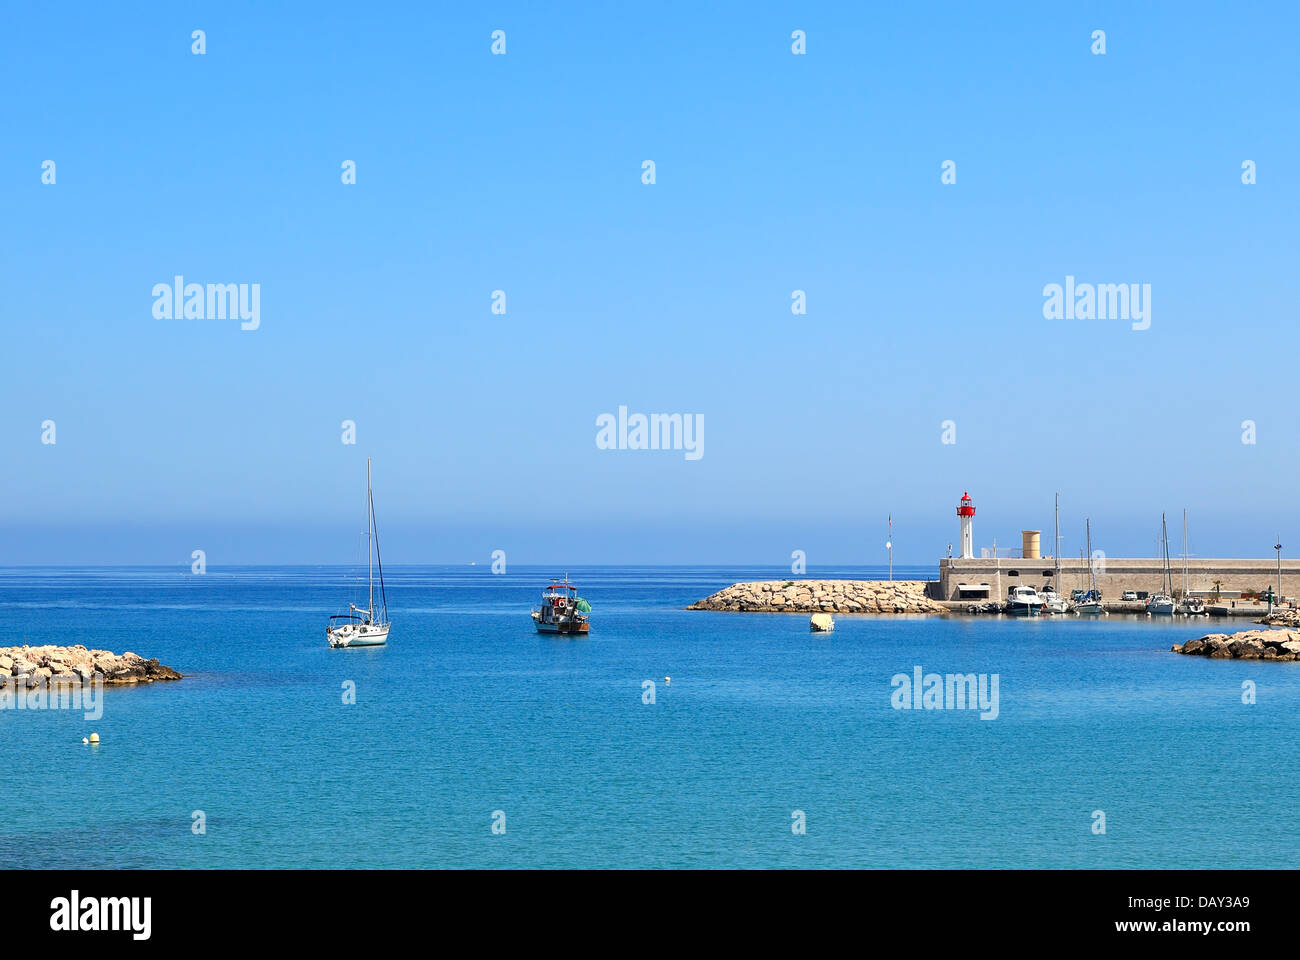 View of yachts and boats floating on calm surface of Mediterranean sea at the entrance to marina in Menton, France. Stock Photo